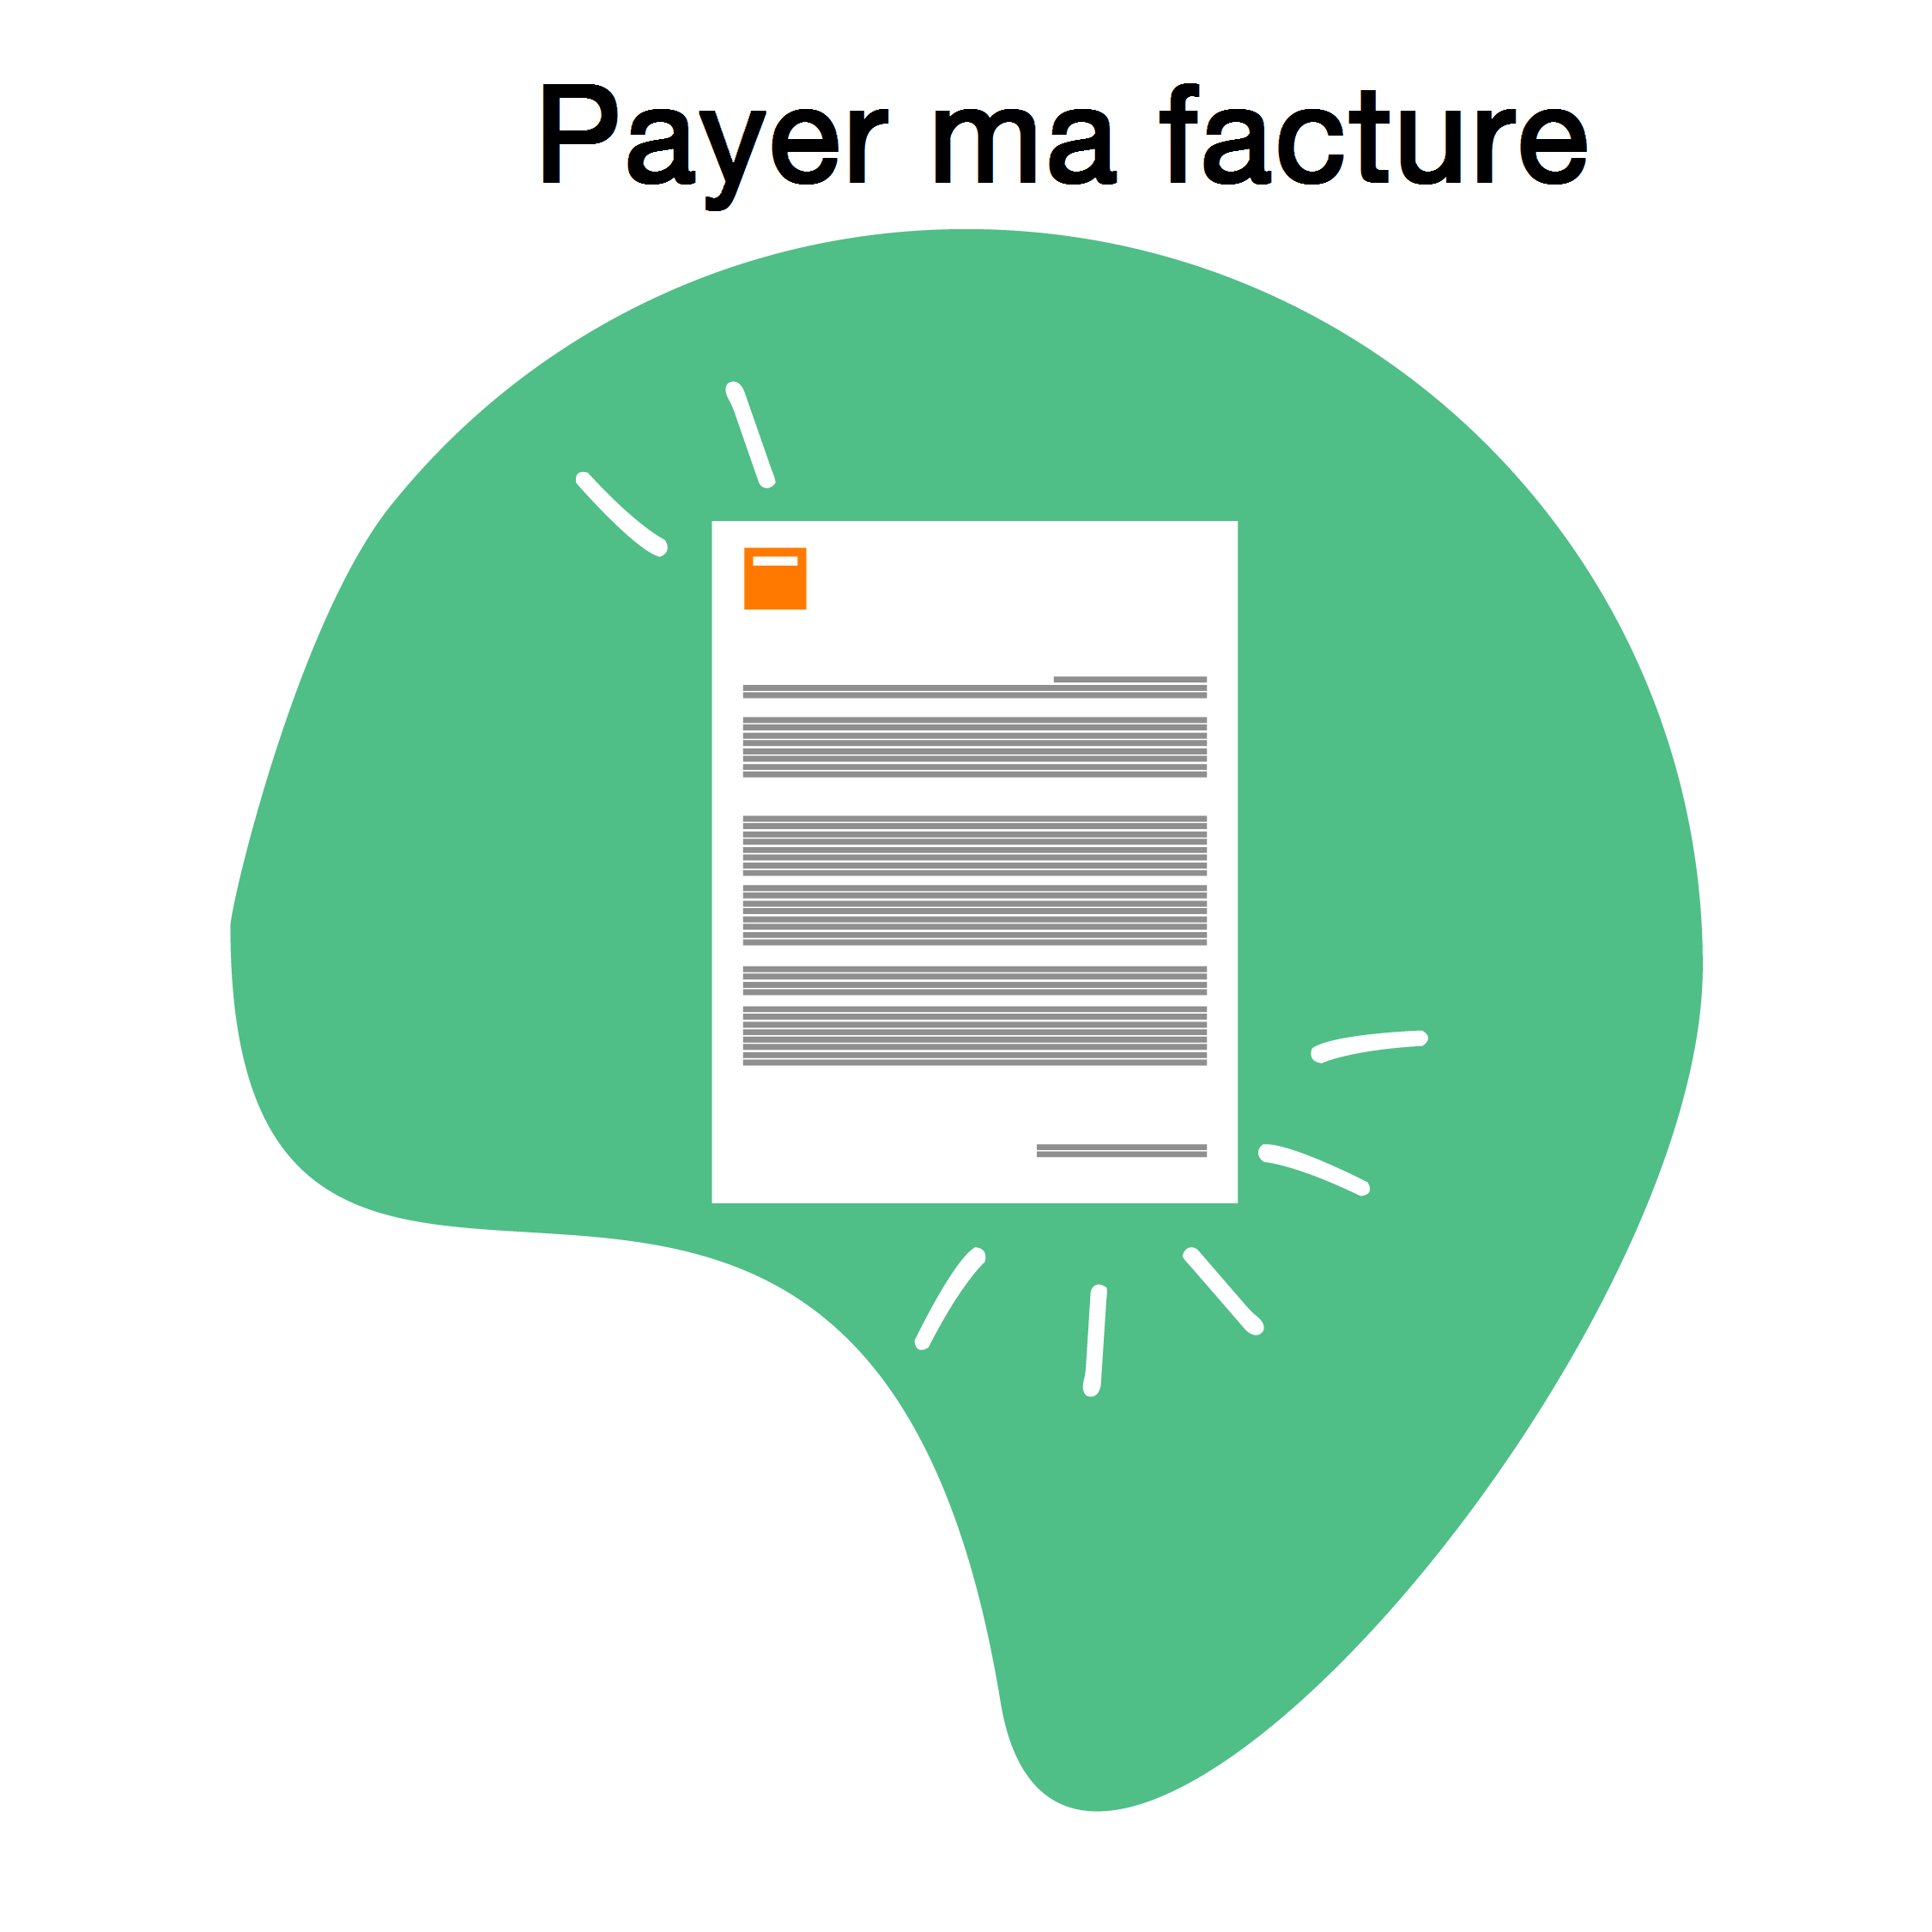 PAYER MA FACTURE